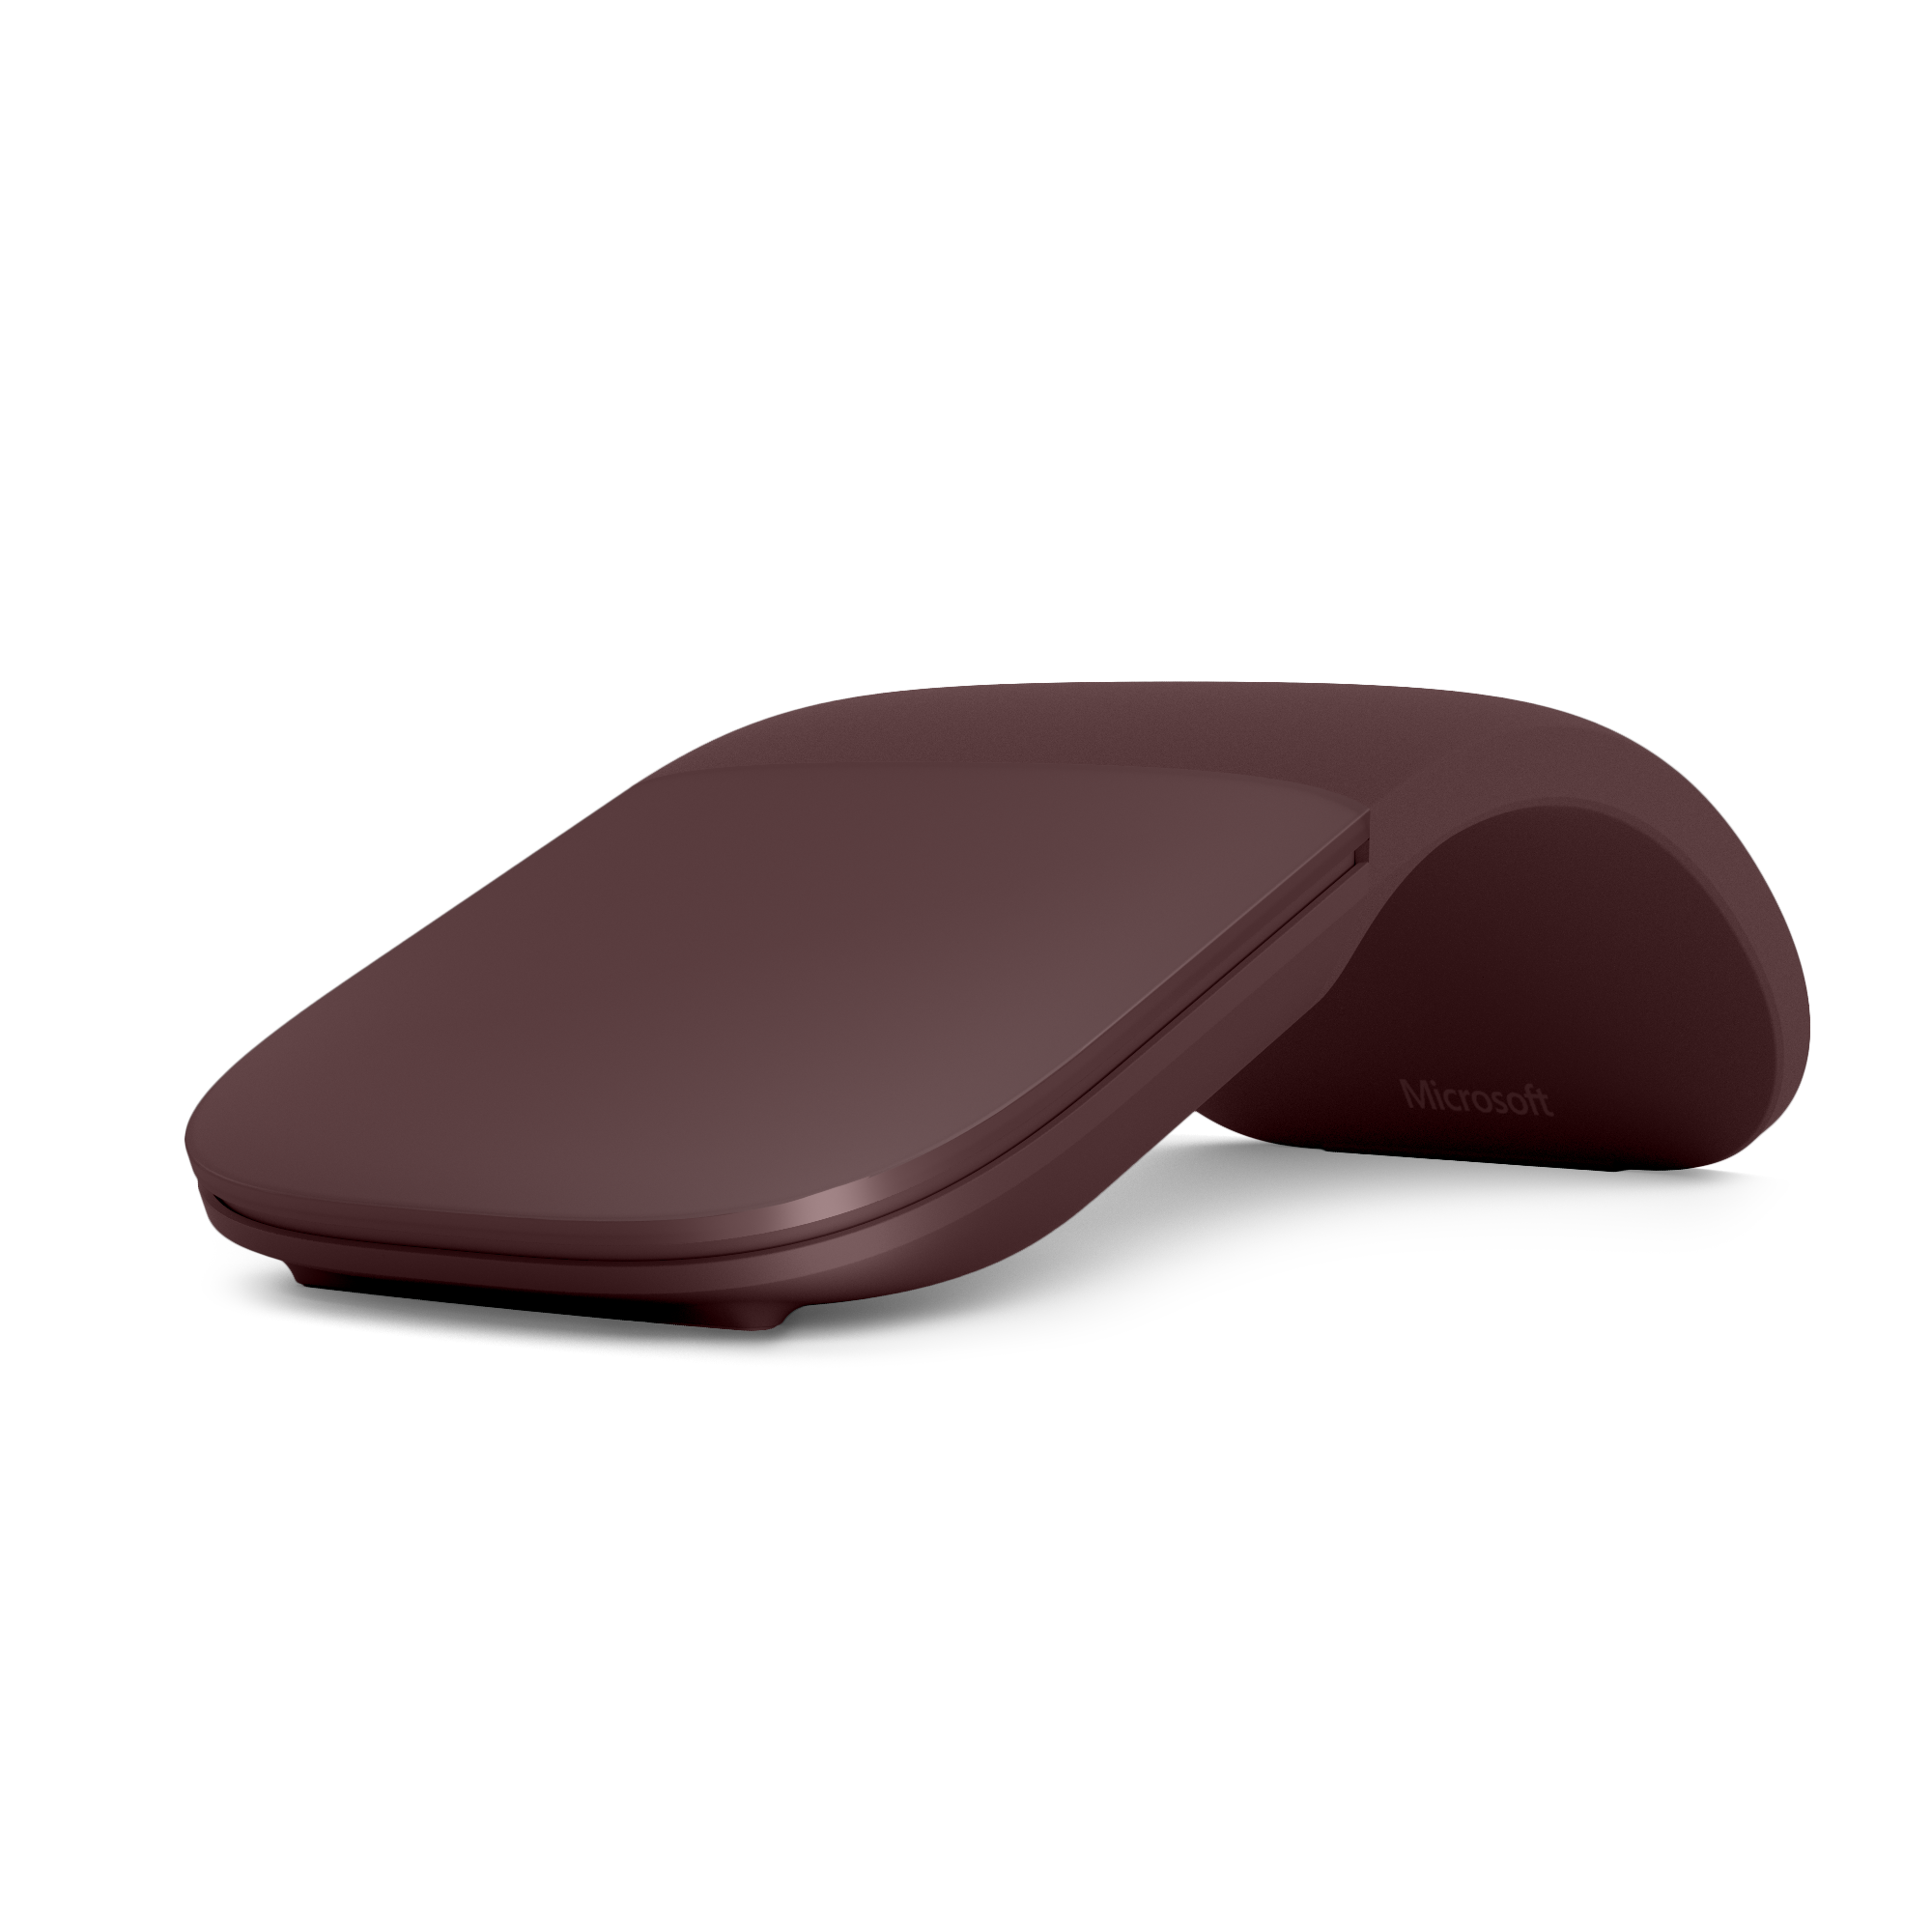 hand conform designed Burgundy, to #MicrosoftEDU Surface to – in Event Arc Microsoft Mouse your